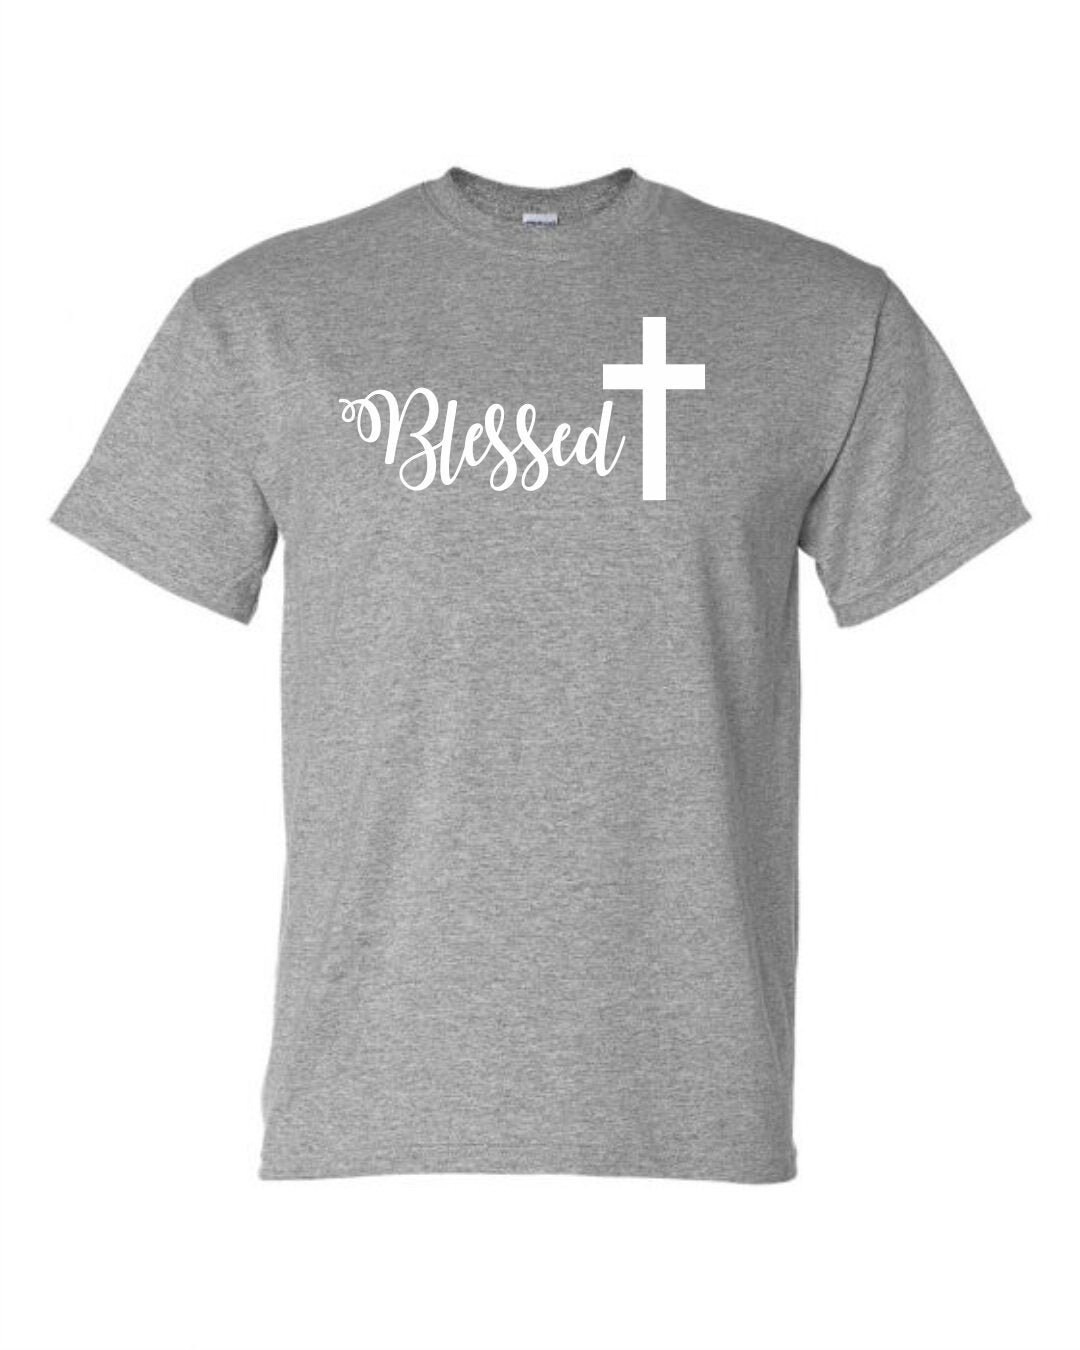 Blessed with Cross Shirt Simple Script Christian Blessed | Etsy